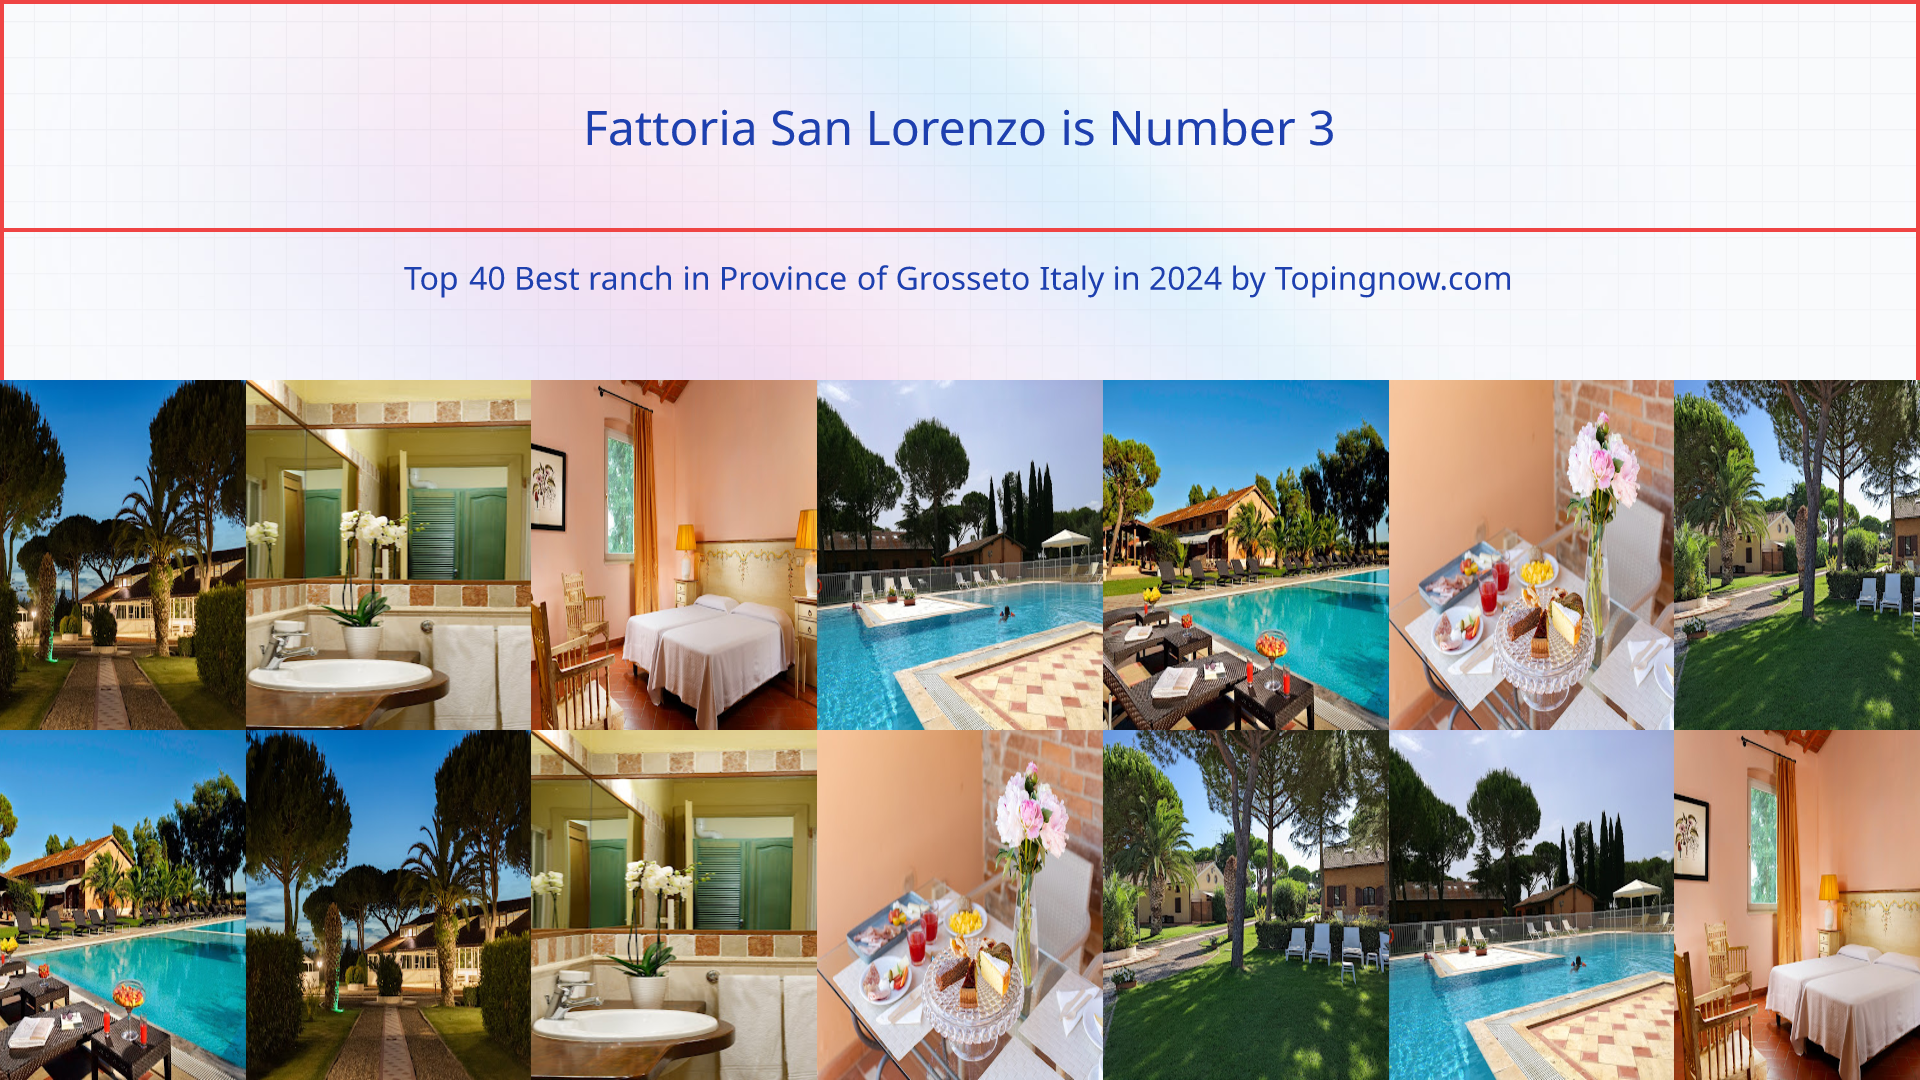 Fattoria San Lorenzo: Top 40 Best ranch in Province of Grosseto Italy in 2024